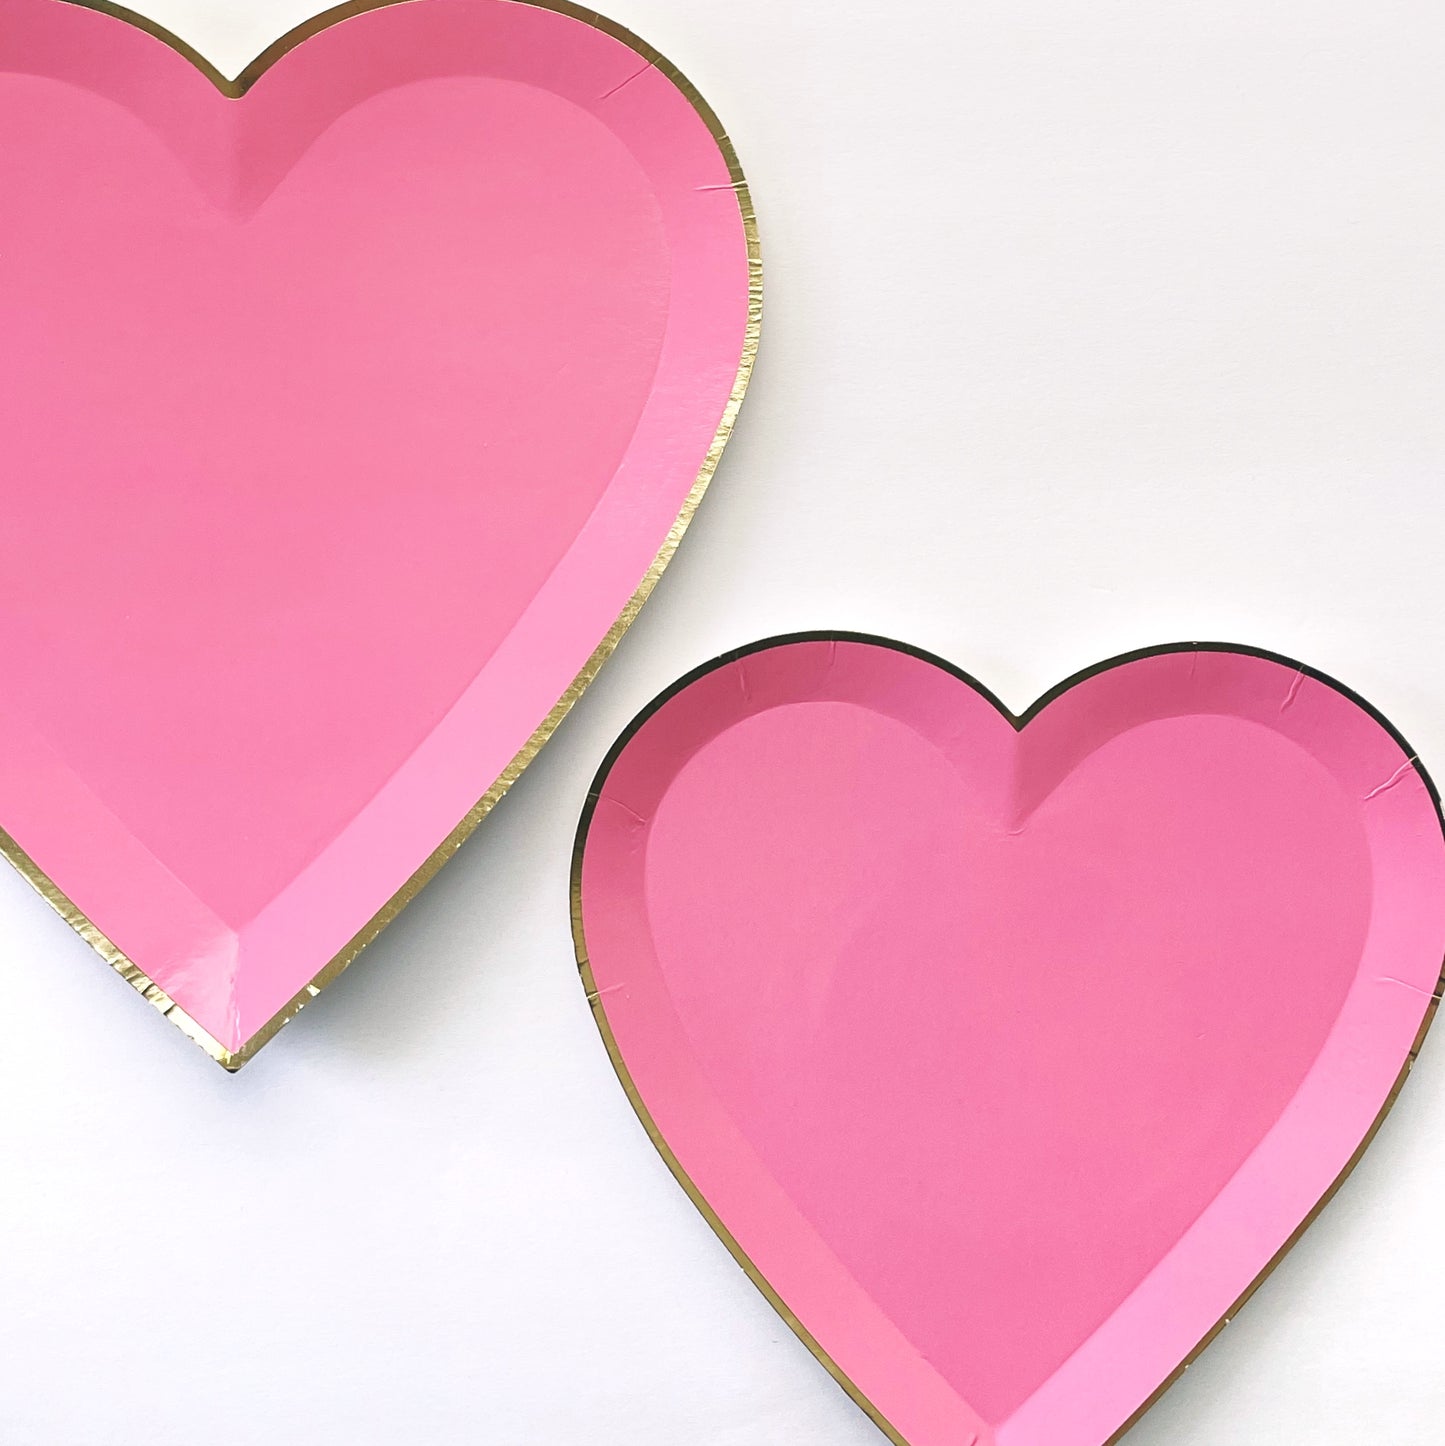 Bright pink heart shaped large and small party plates, with a gold foil edge.